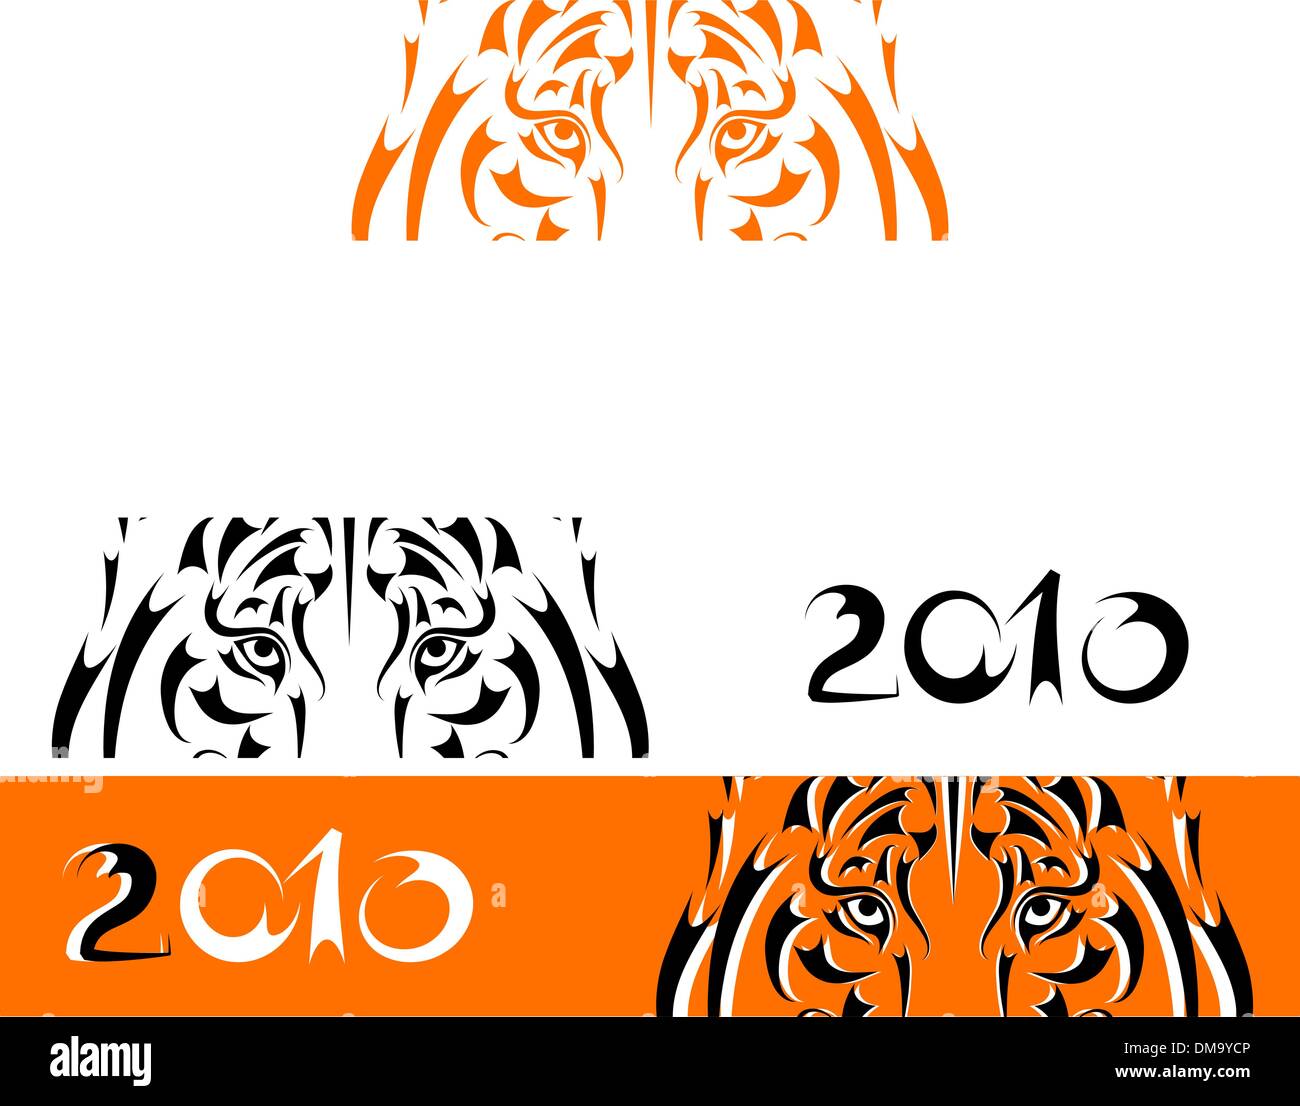 Tiger banners, symbol 2010 new year Stock Vector